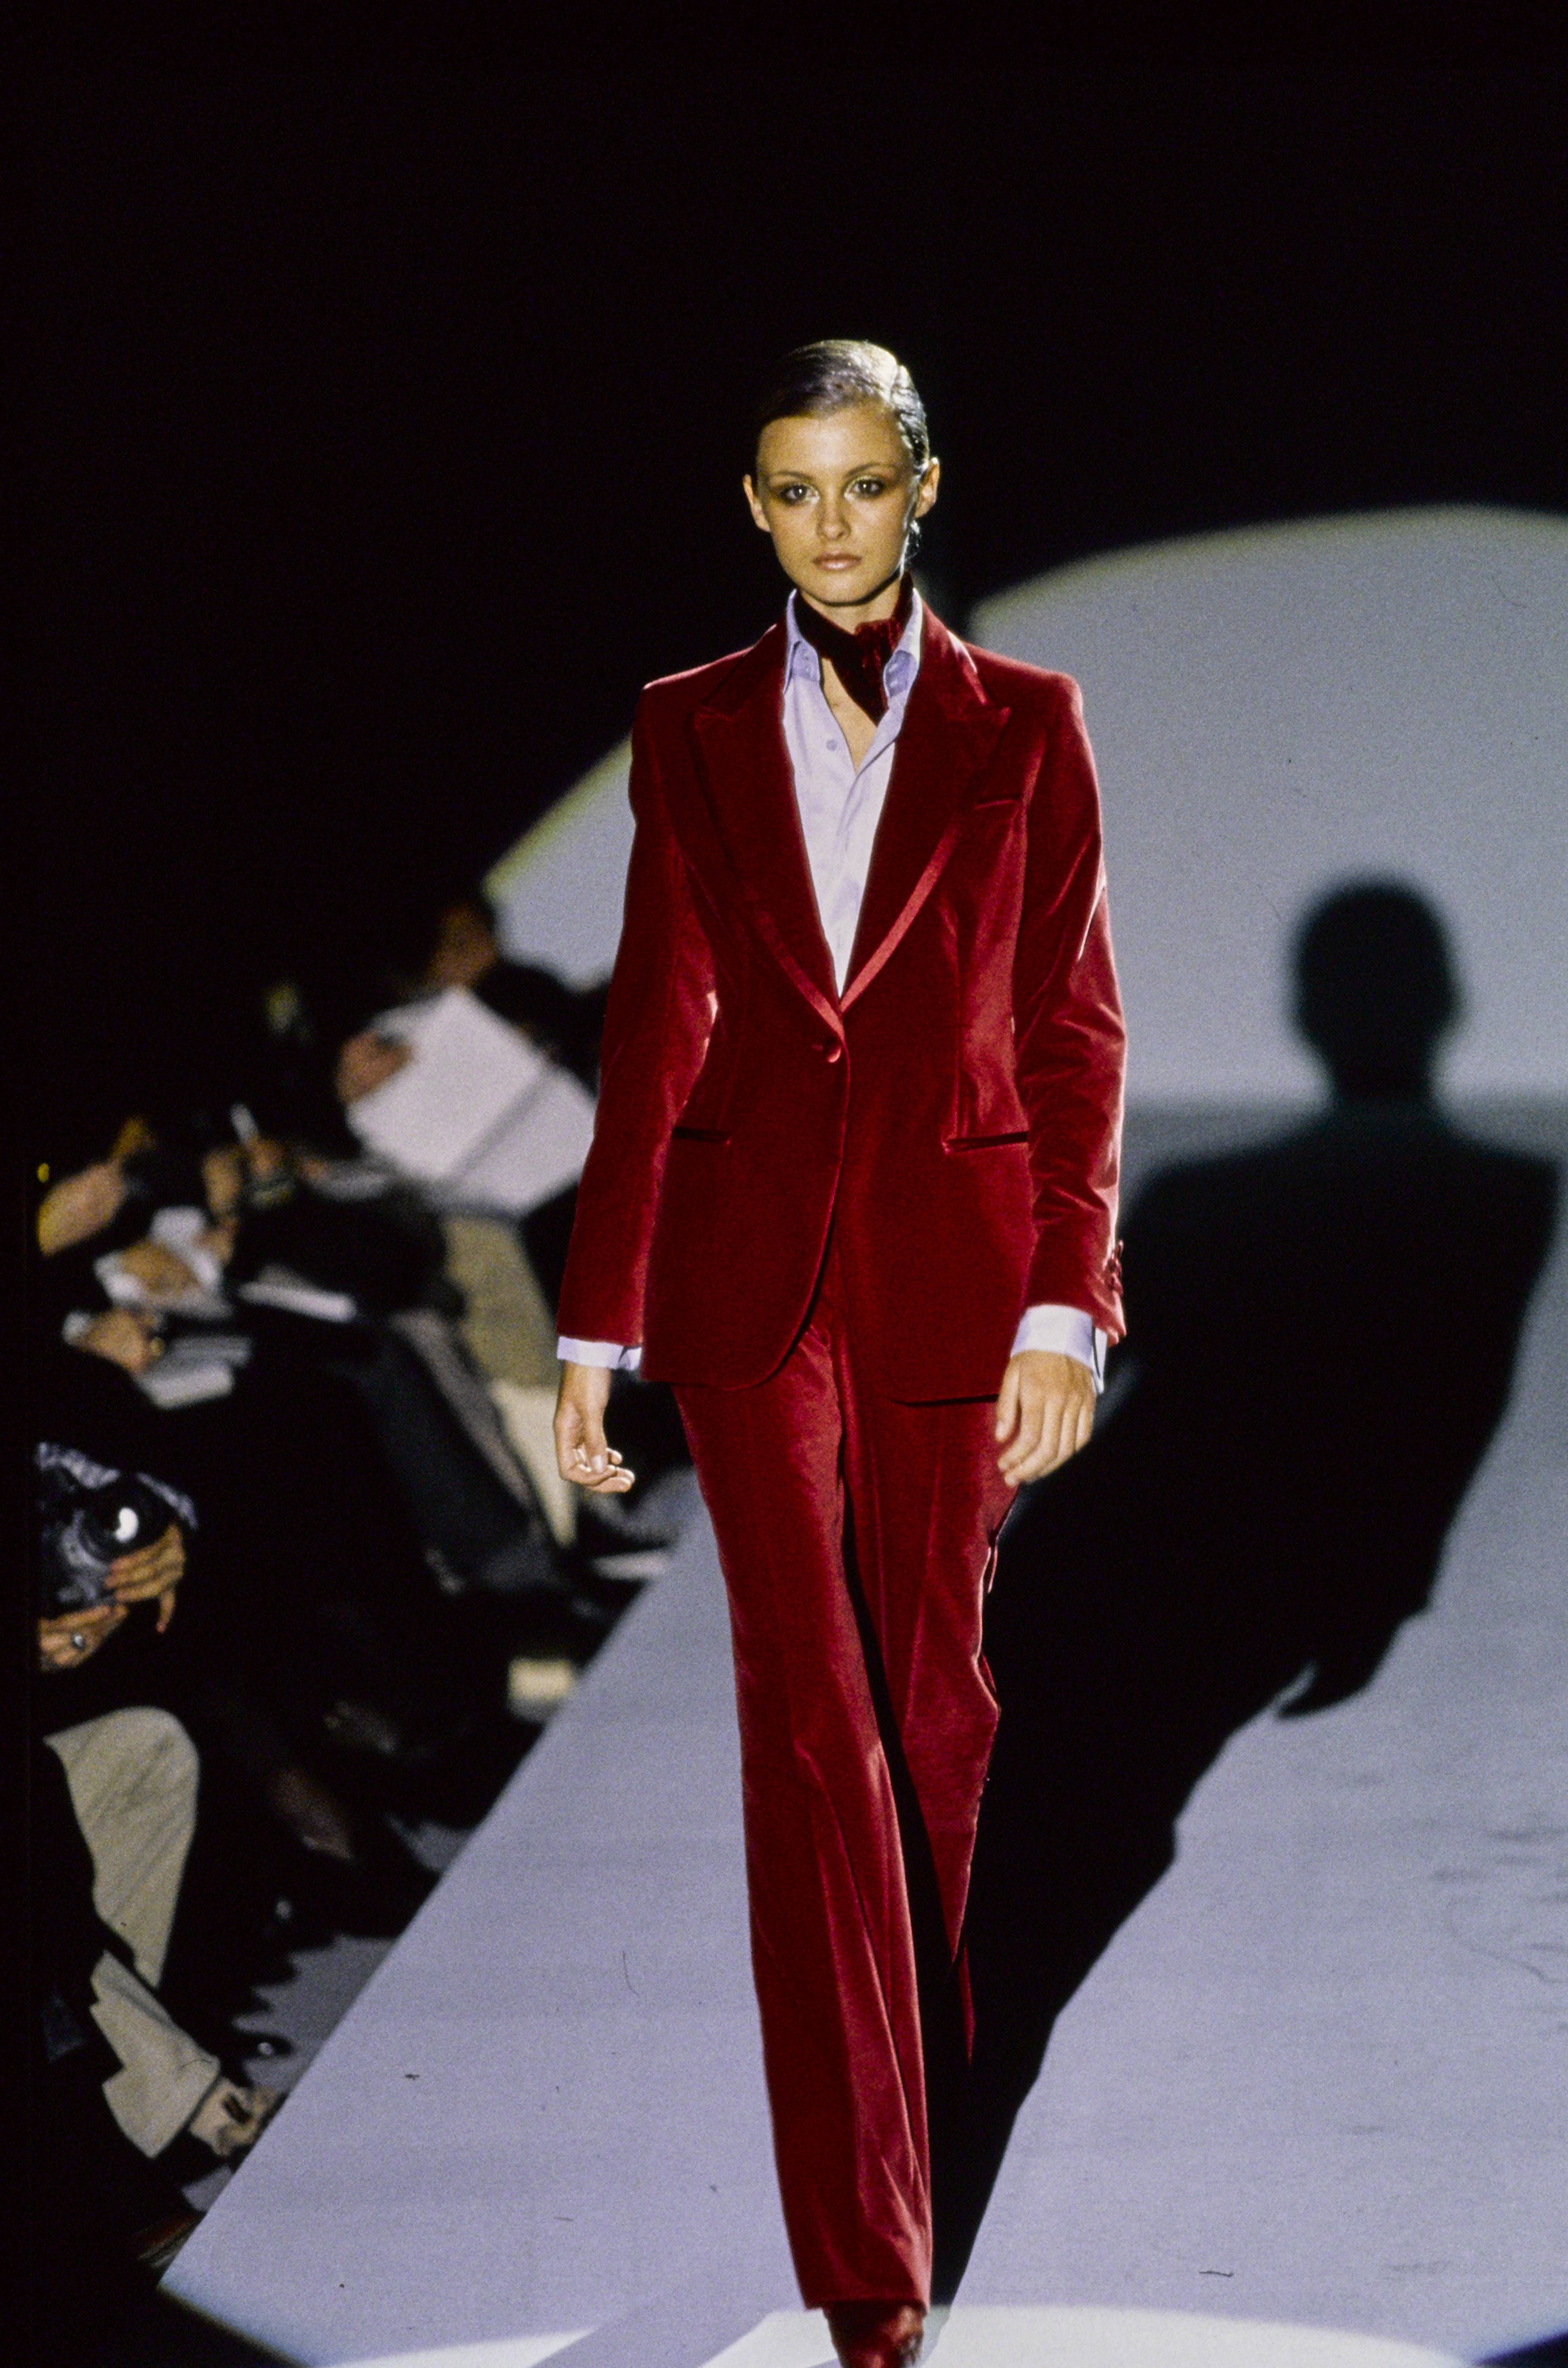 Tom Ford Gucci Fall/Winter 1996 Runway Red - Tom Ford Referenced His Own Gucci Collection for Fall/Winter